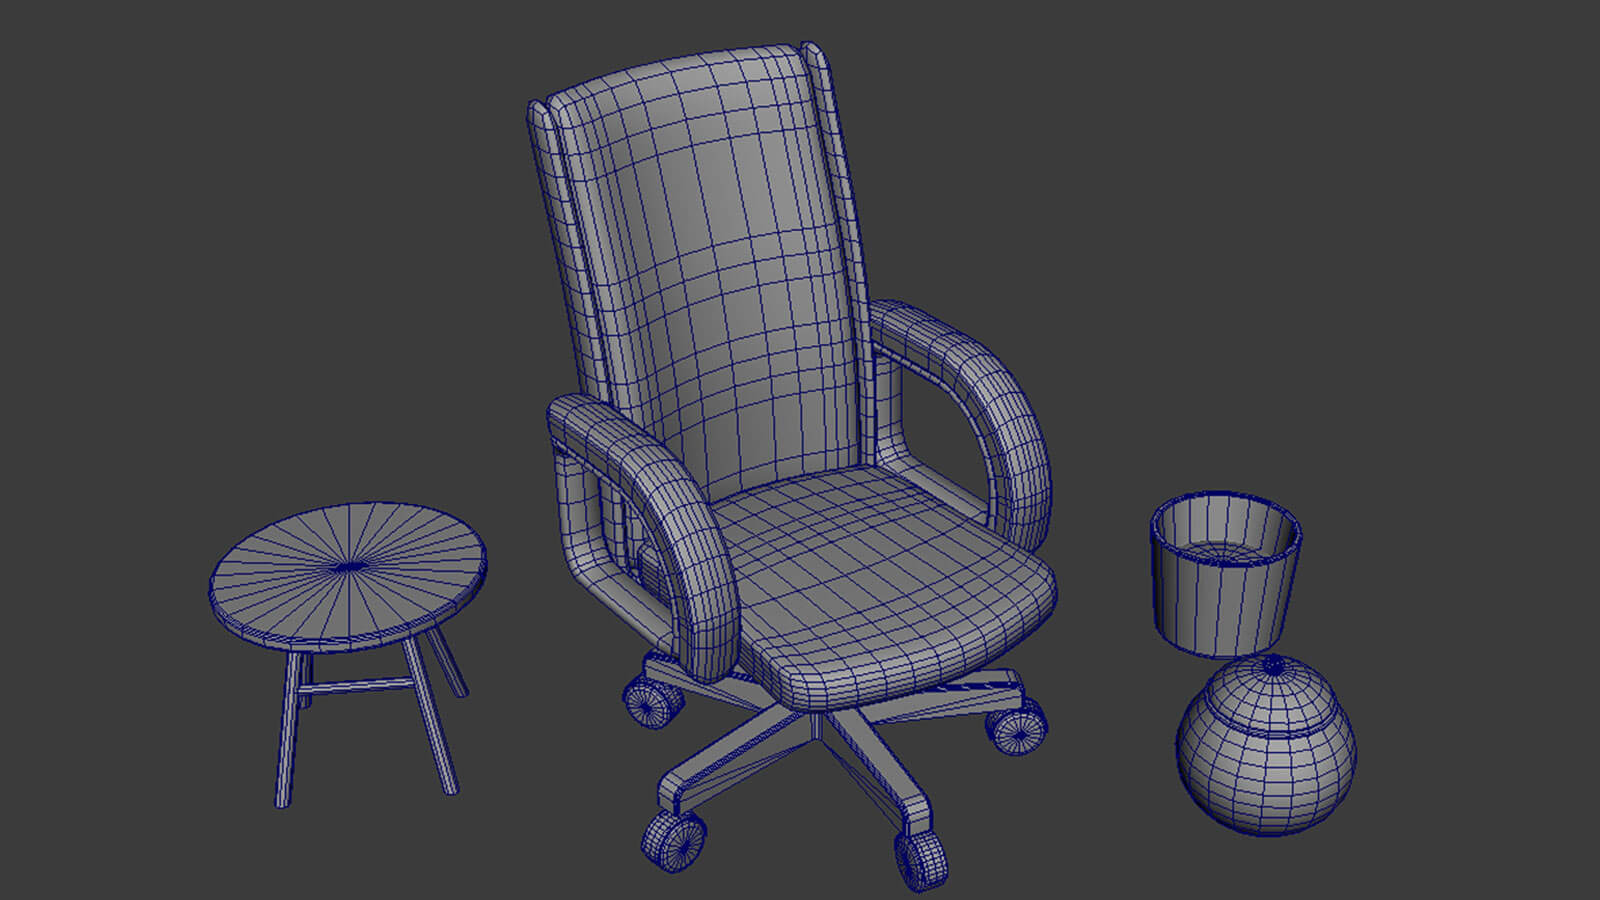 View of 3D mesh of a table, a chair, and other props